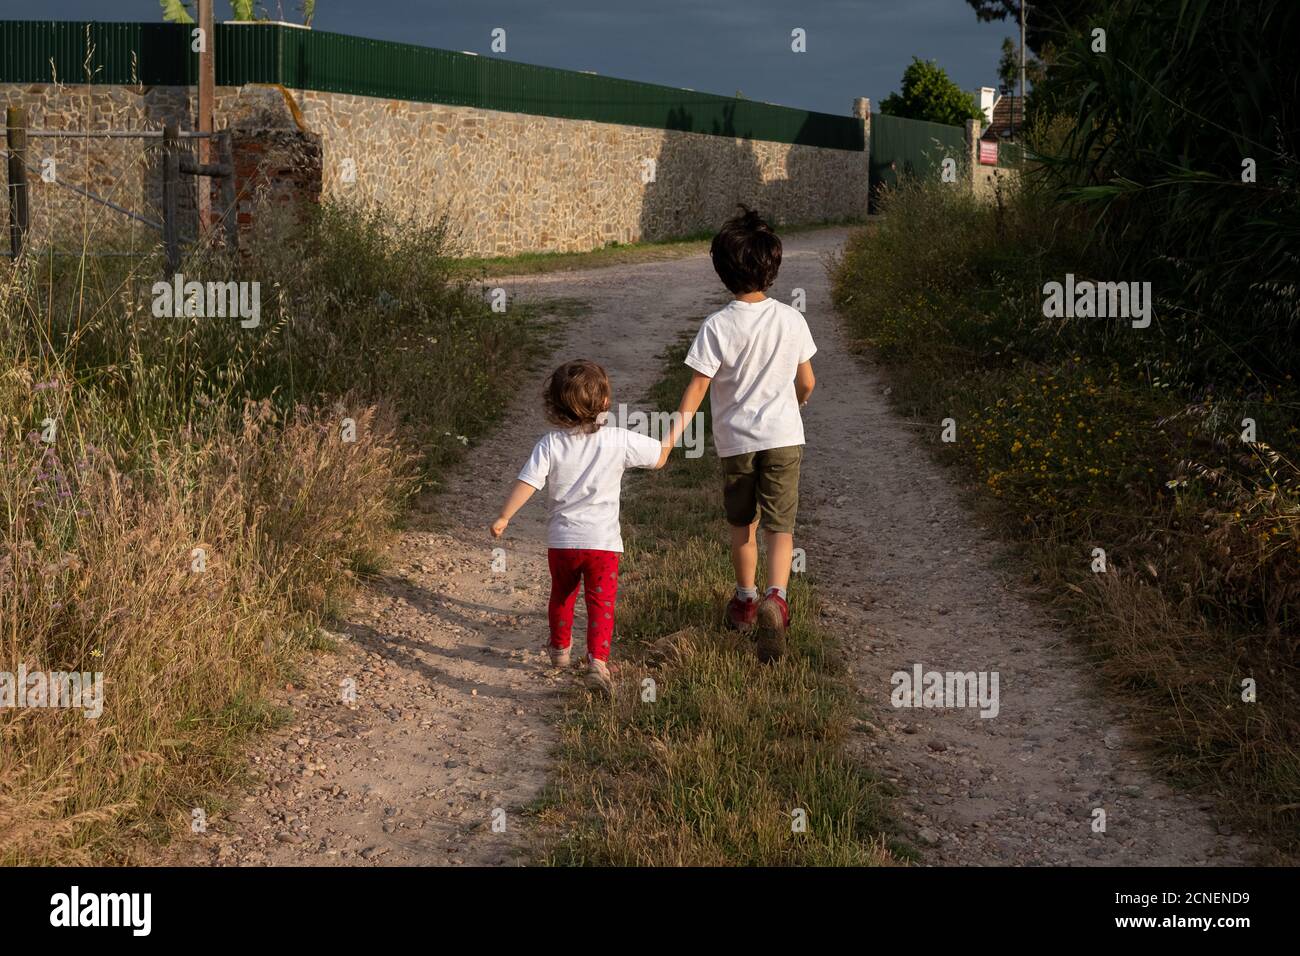 Brothers, young boy and girl, walking together and holding hands on pathway in countryside. Stock Photo